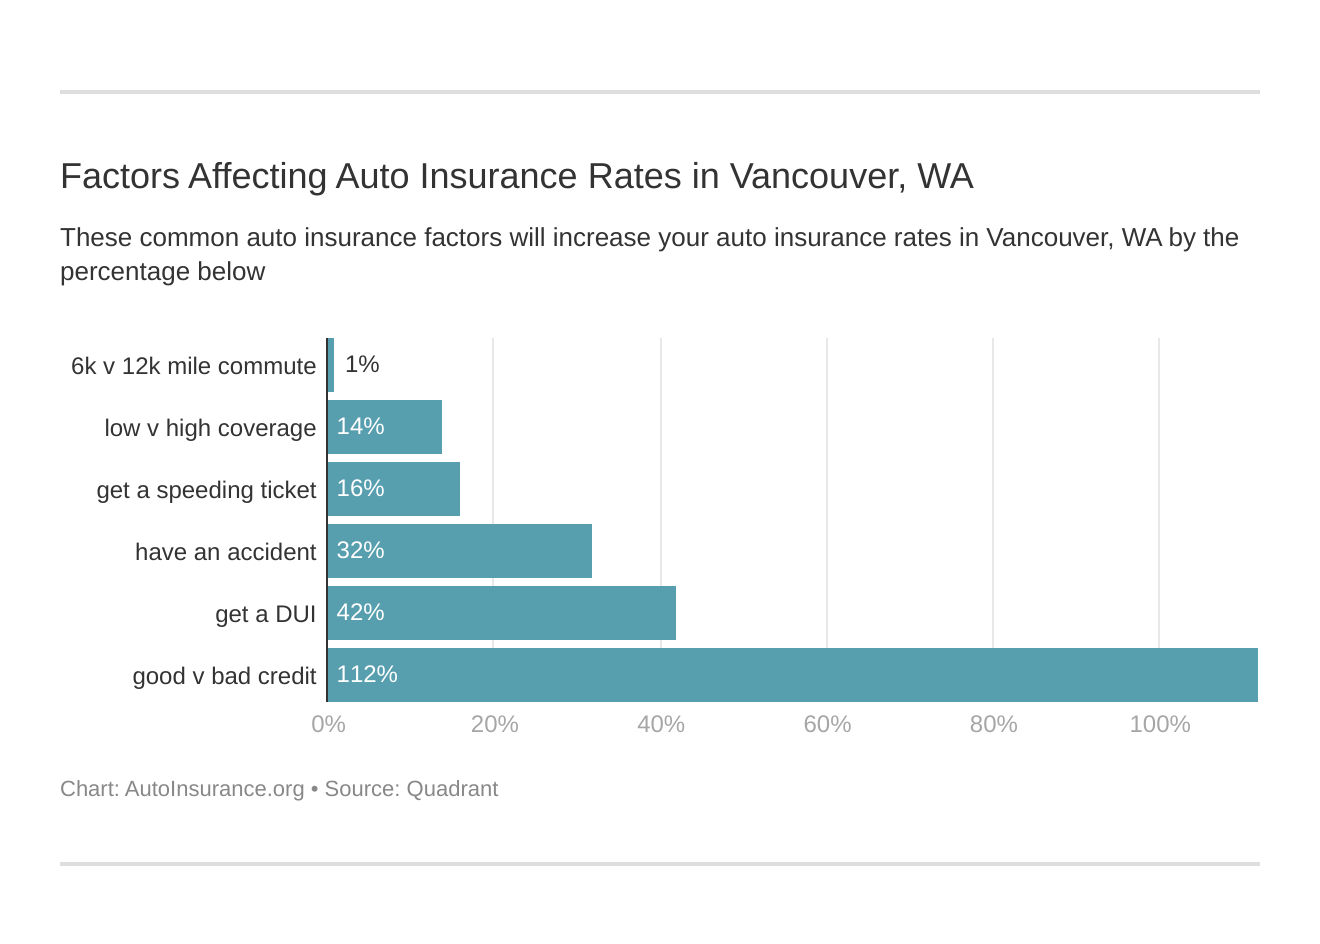 Factors Affecting Auto Insurance Rates in Vancouver, WA